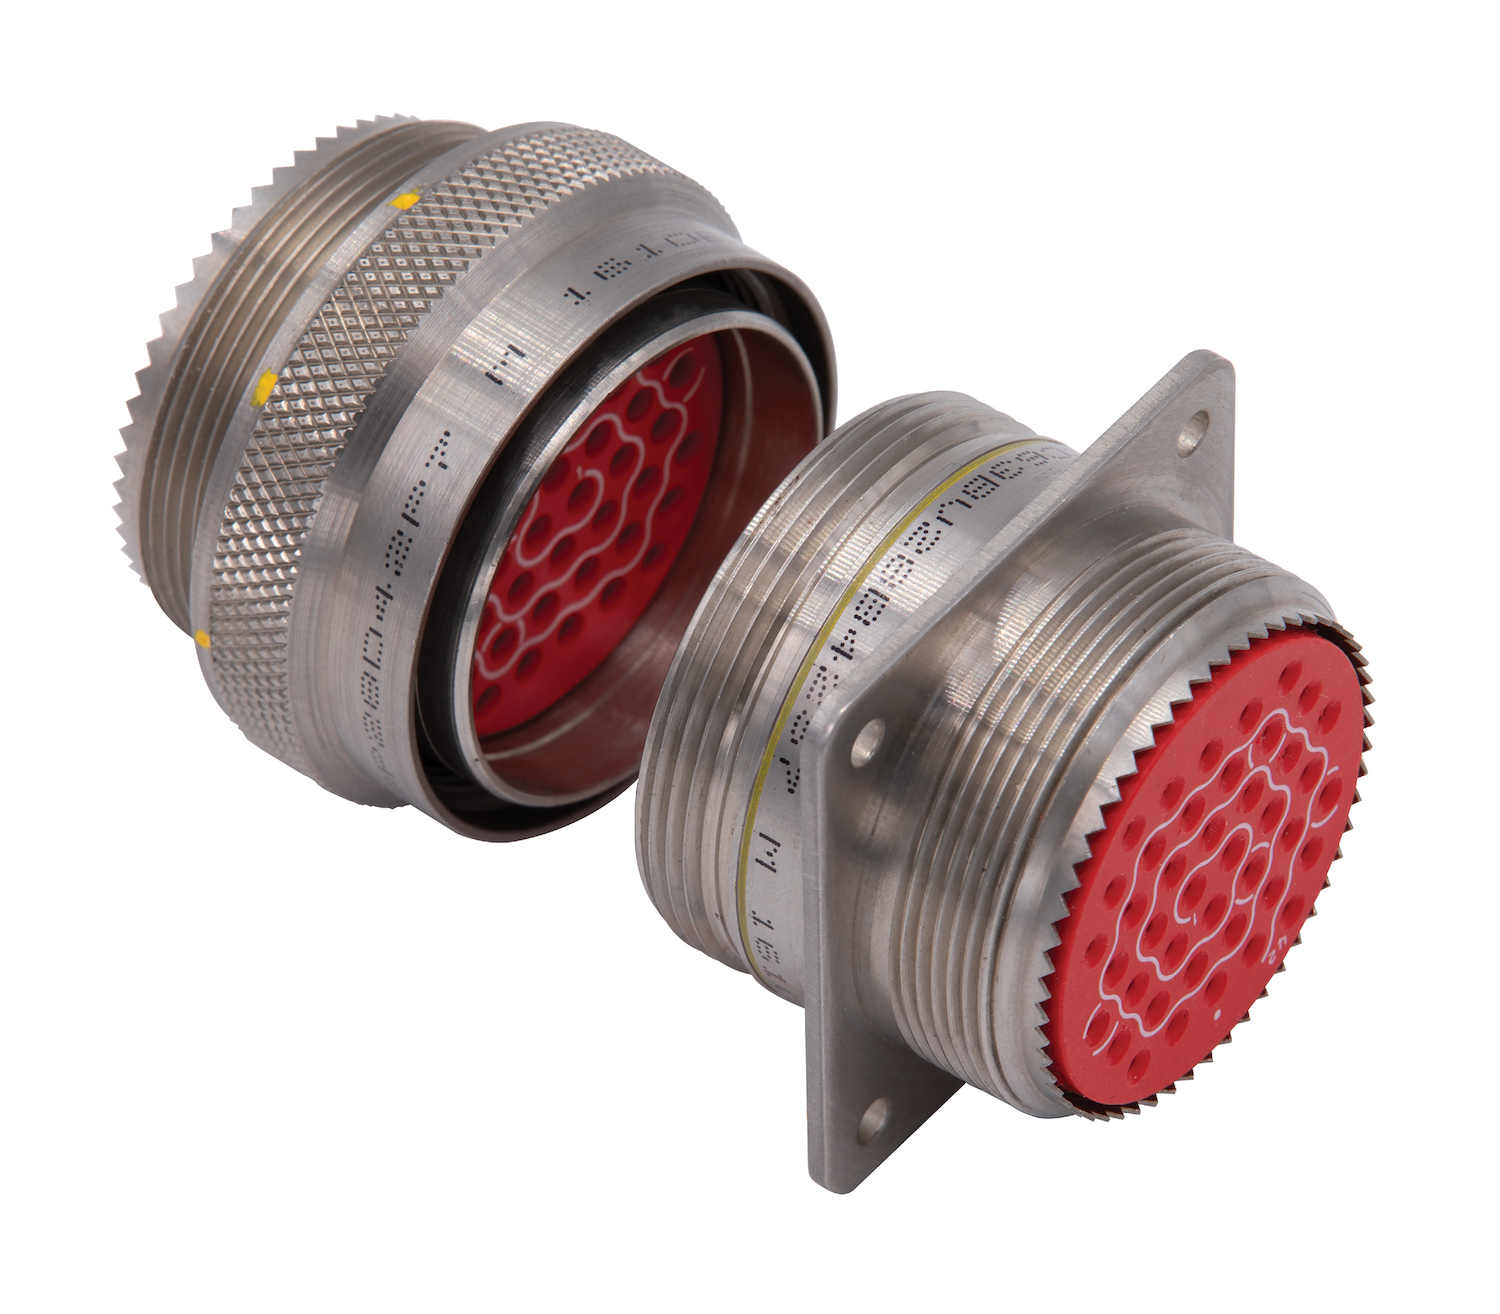  circular mil-spec connector products from Cinch